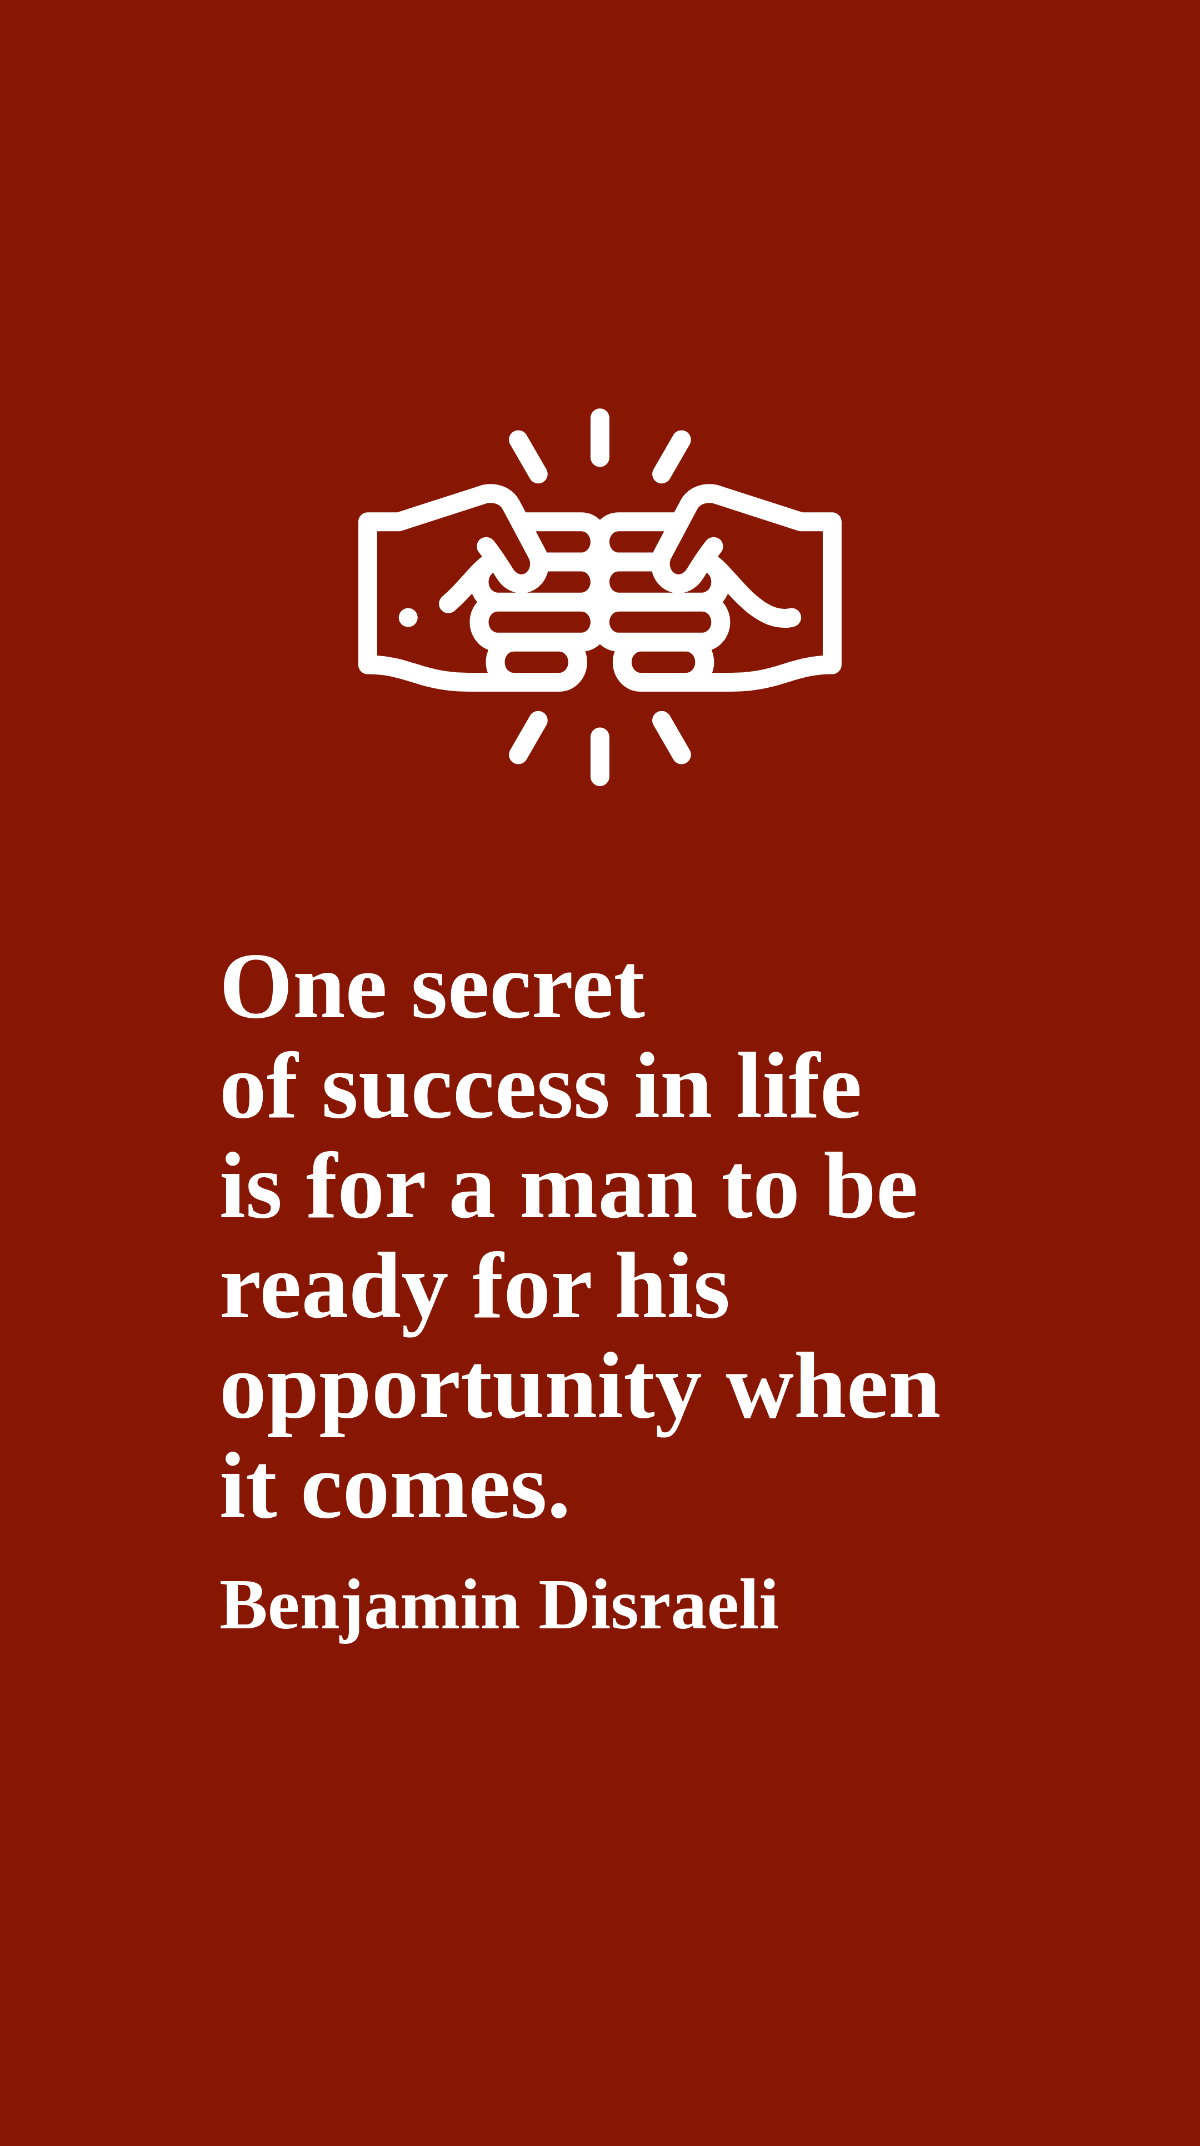 Free Benjamin Disraeli - One secret of success in life is for a man to be ready for his opportunity when it comes. Template